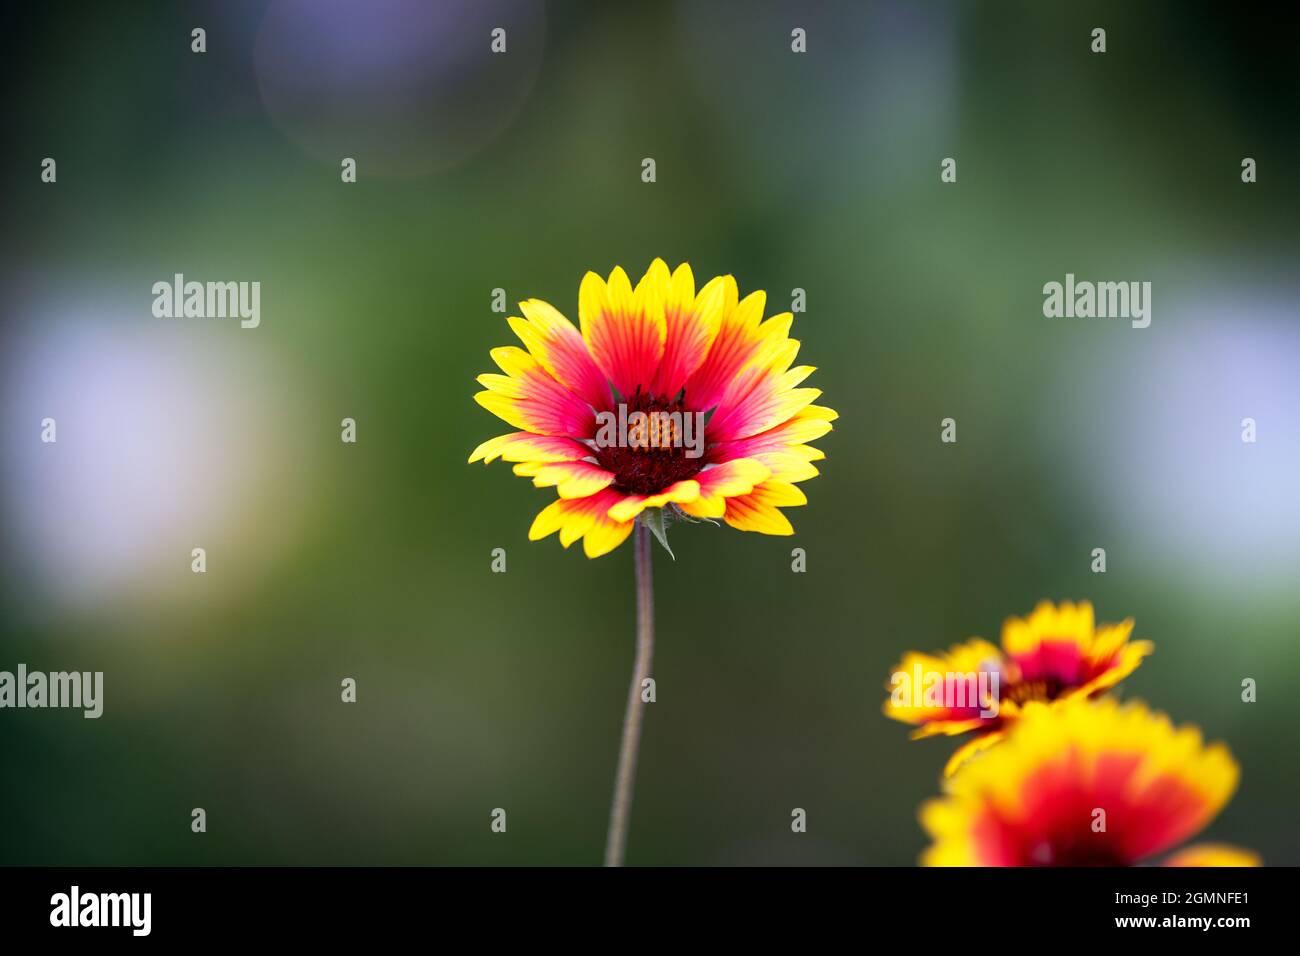 Yellow and pink flower with a green background (Indian blanket flower) Stock Photo